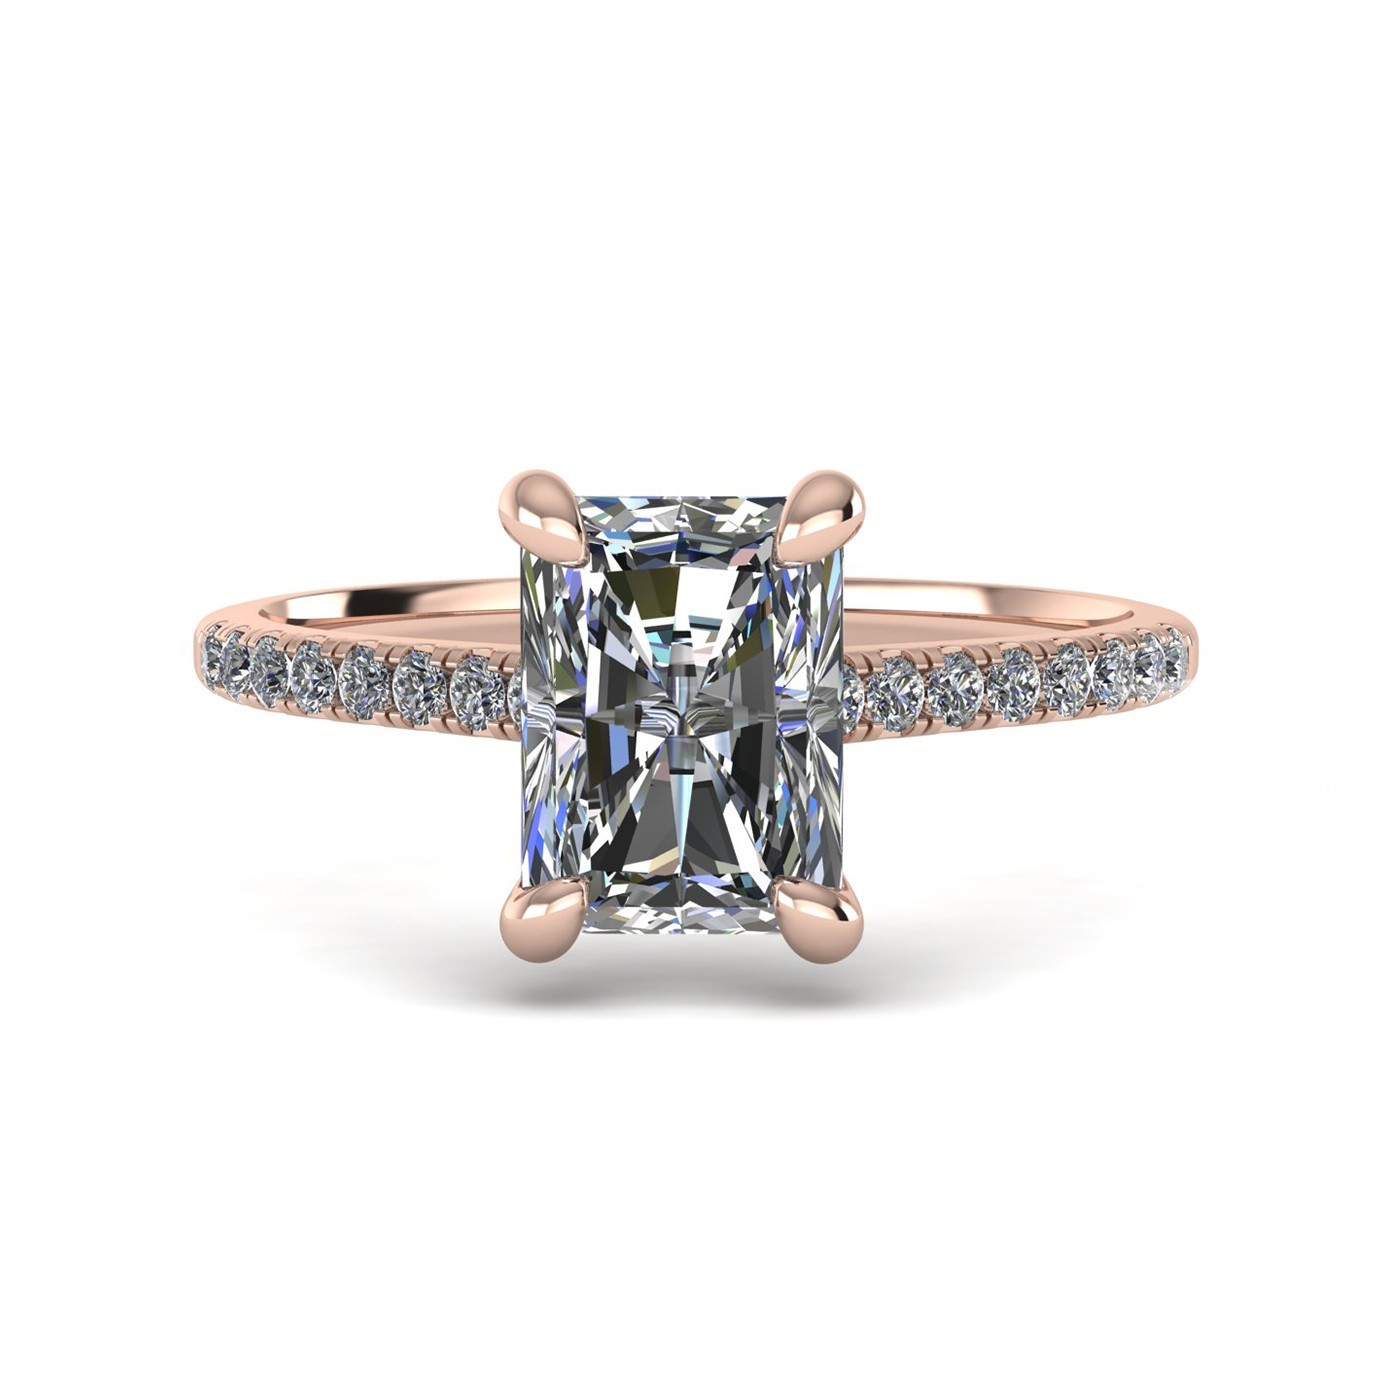 18k rose gold  0,50 ct 4 prongs radiant cut diamond engagement ring with whisper thin pavÉ set band Photos & images